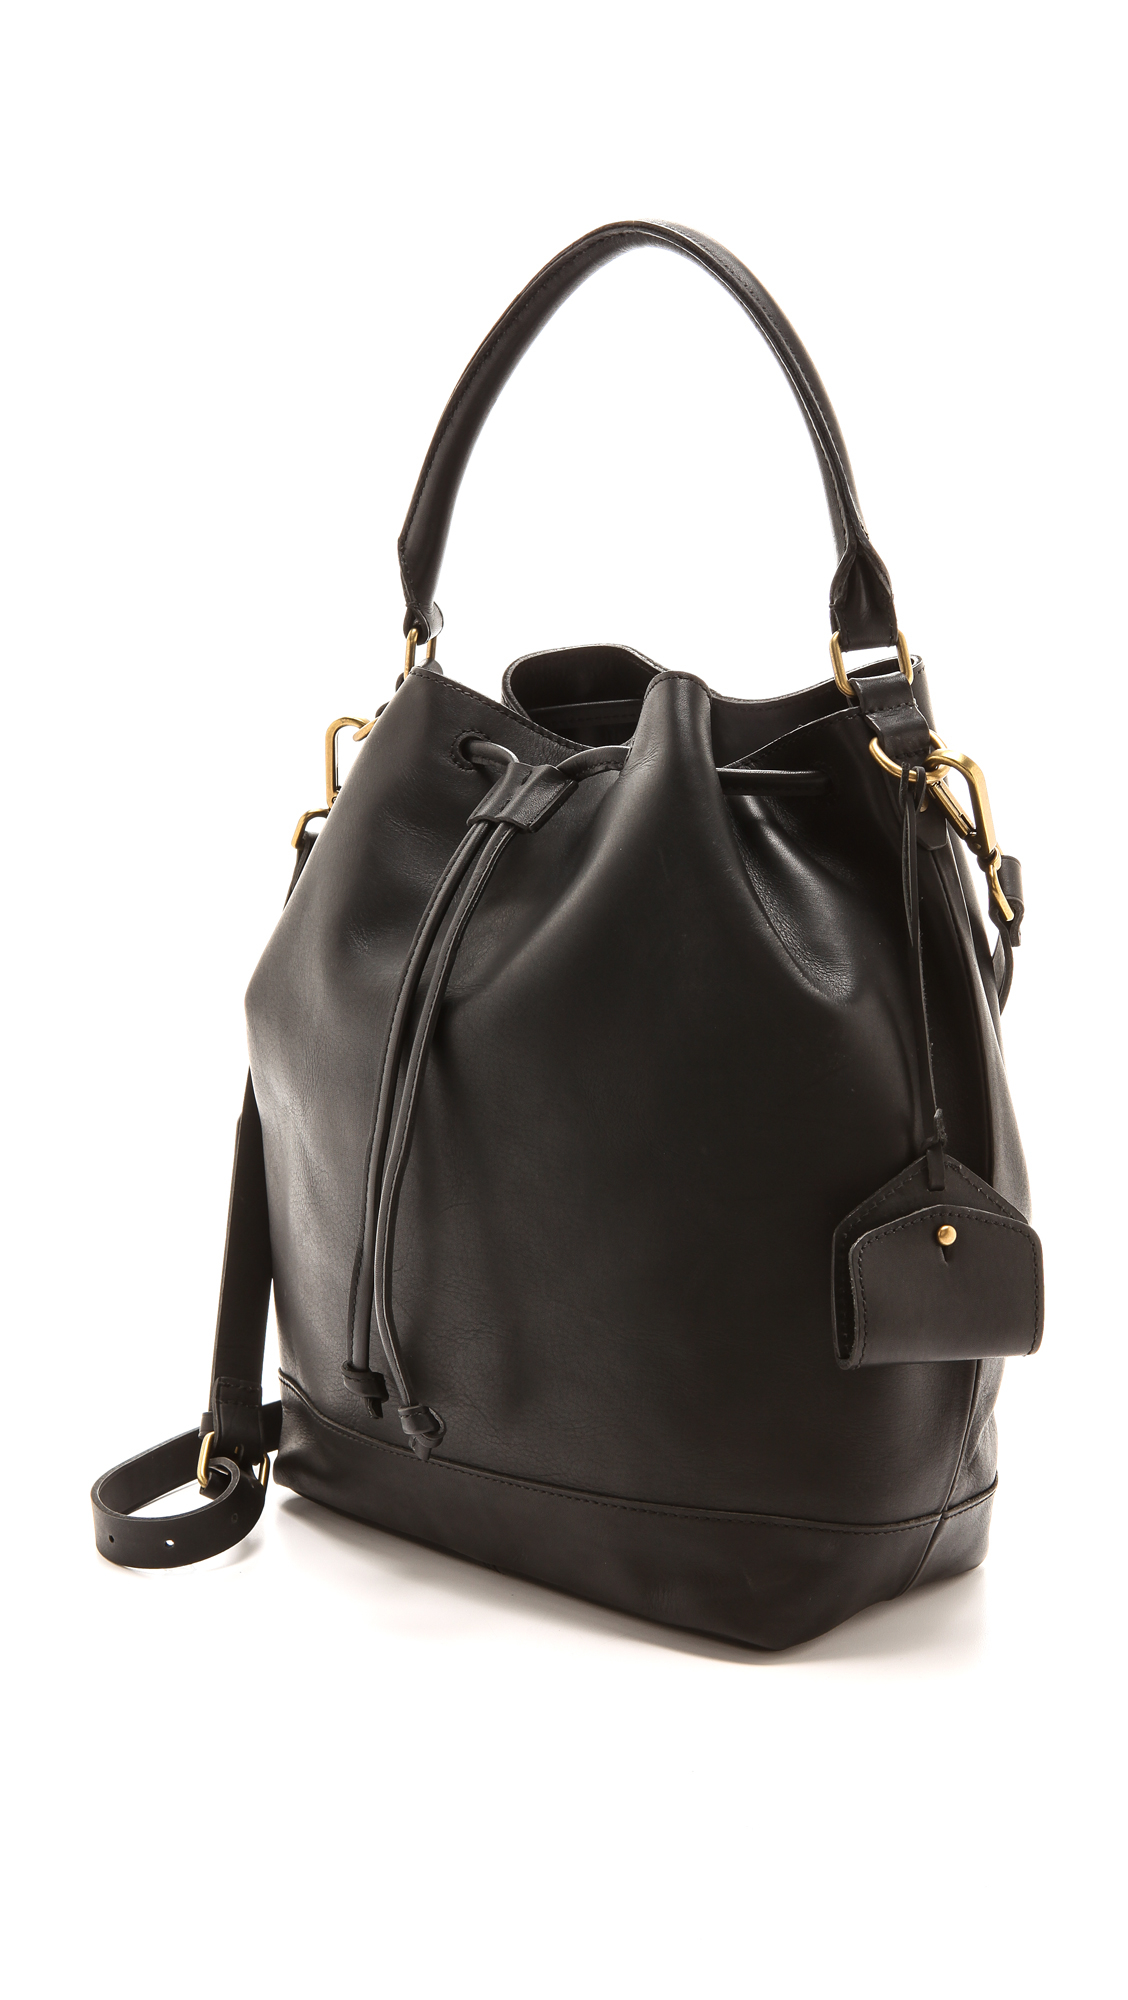 Madewell Leather Bucket Bag in Black - Lyst